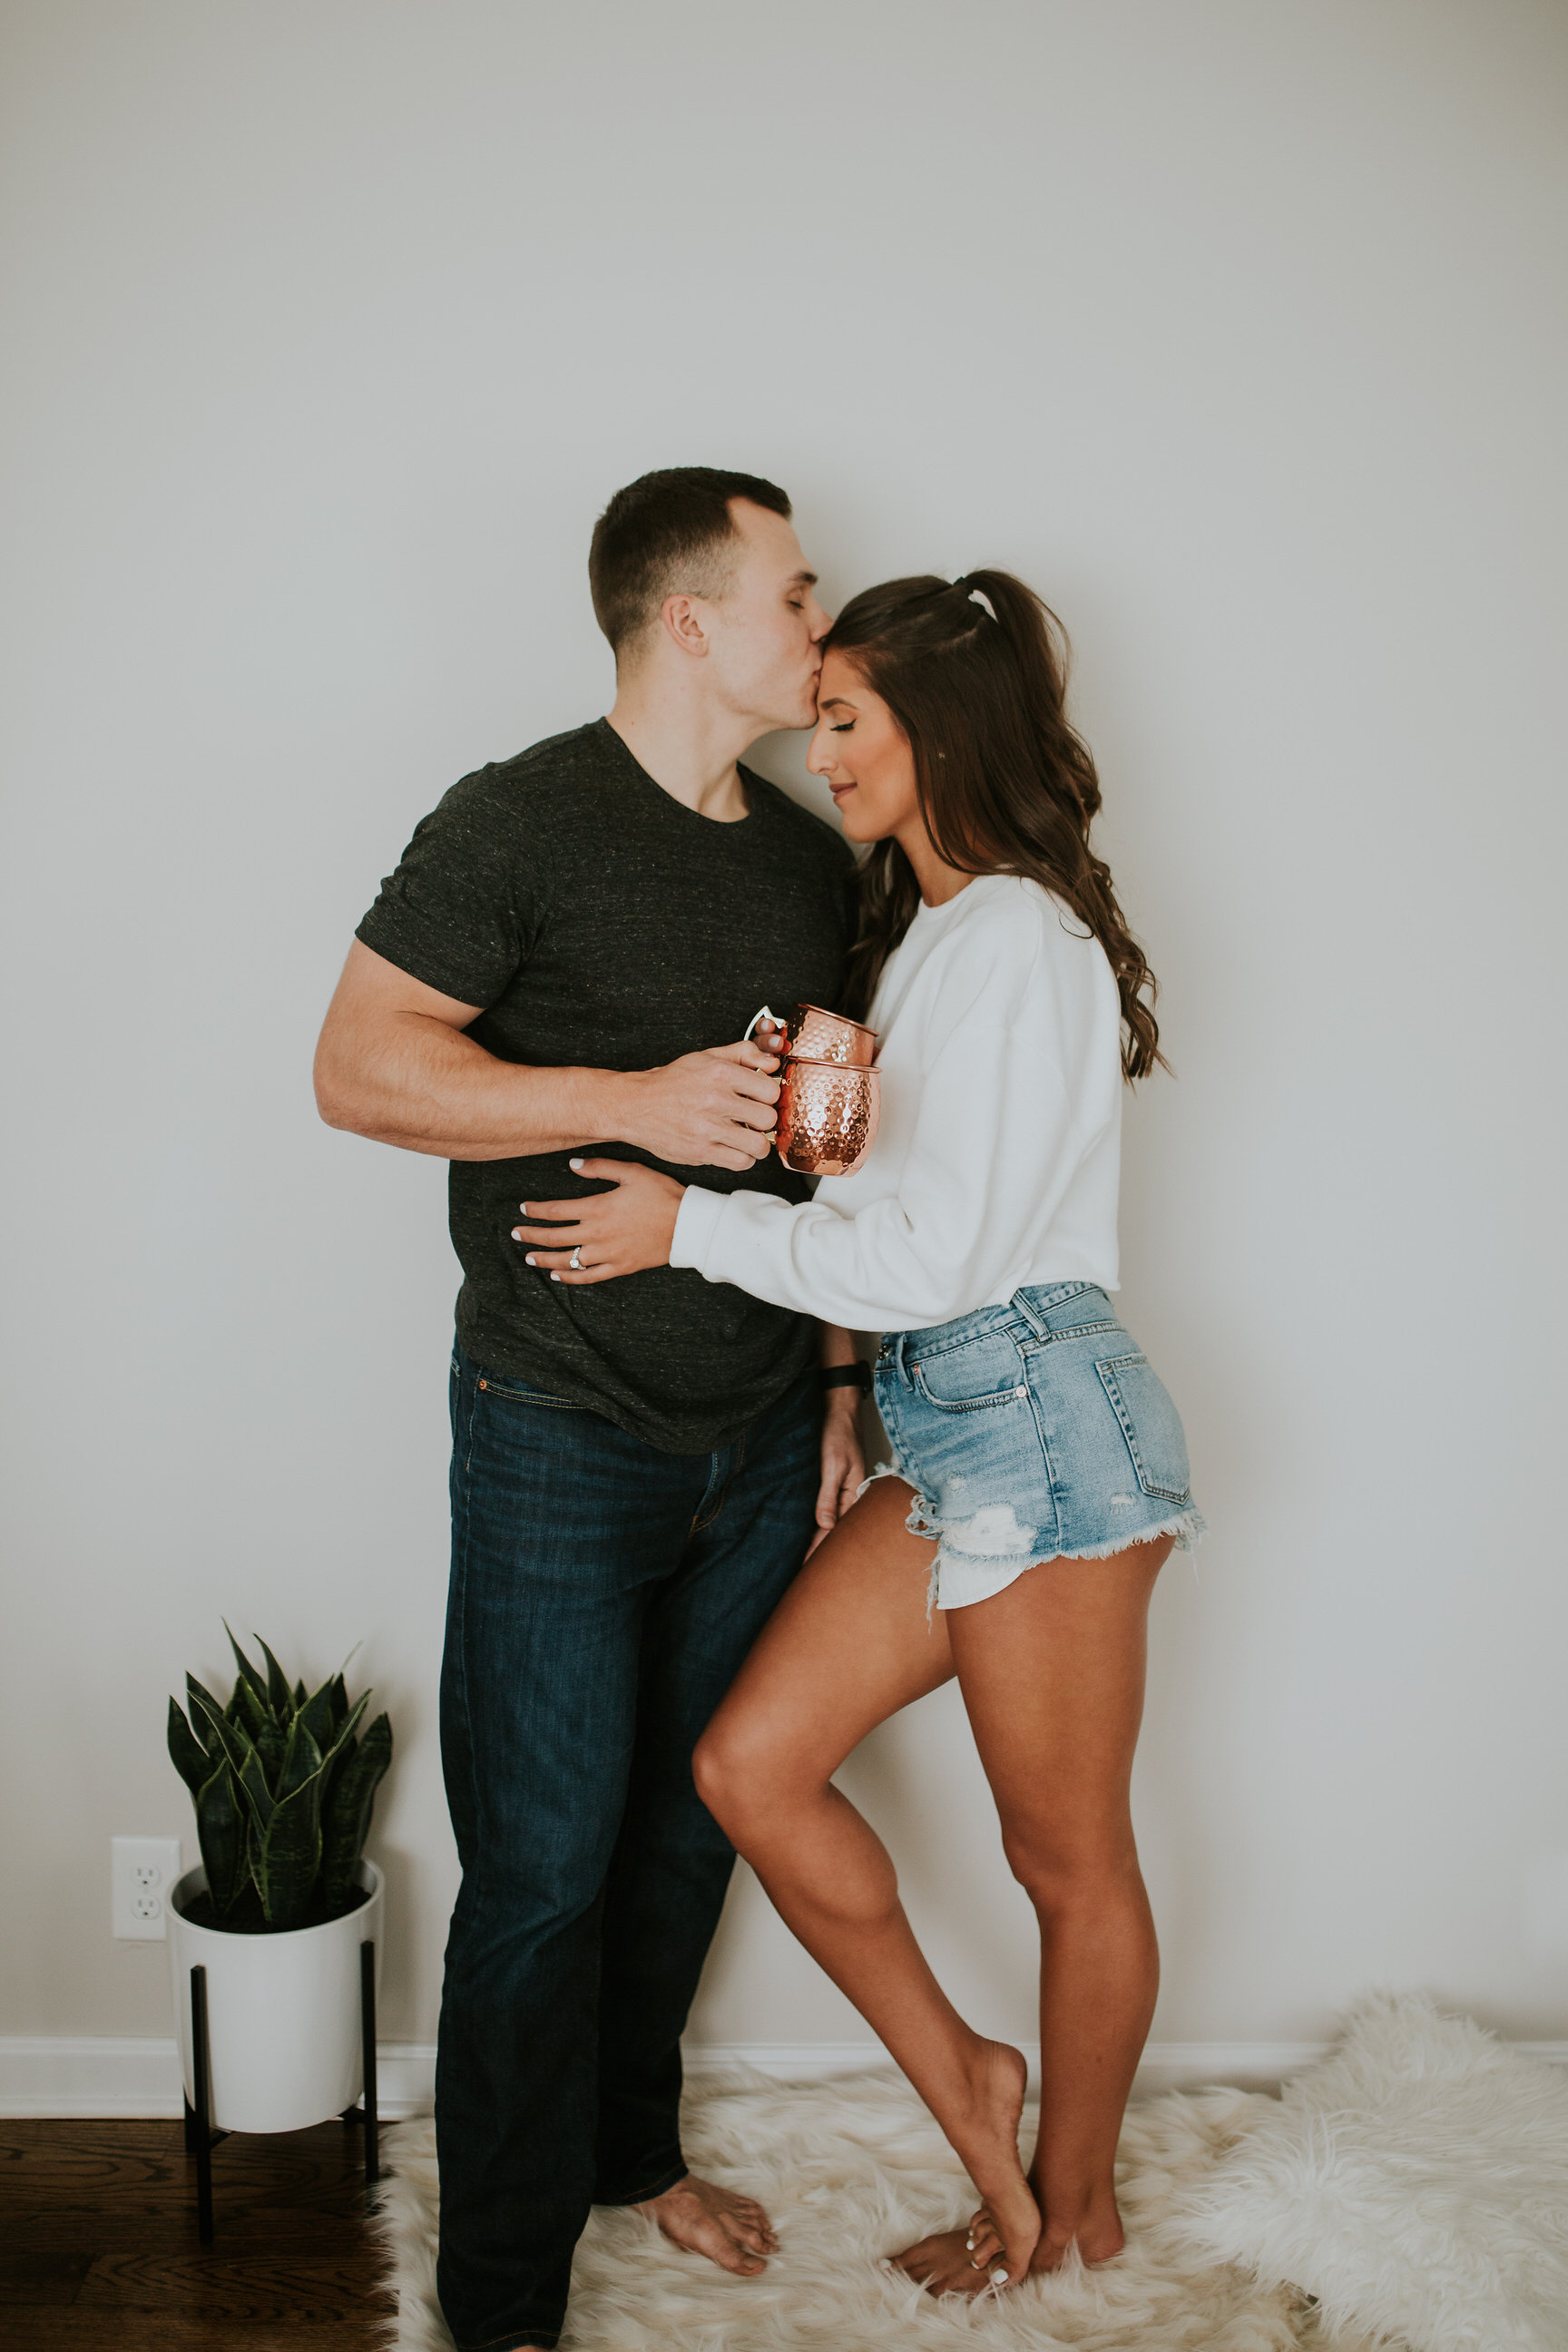 qualities of a healthy relationship, couples style, couples fashion, healthy relationship advice, couples advice, a southern drawl boyfriend, a southern drawl fiance, jordan white a southern drawl, couples photos, engagement session, engagement photos, couples session, healthy relationship qualities // grace wainwright a southern drawl